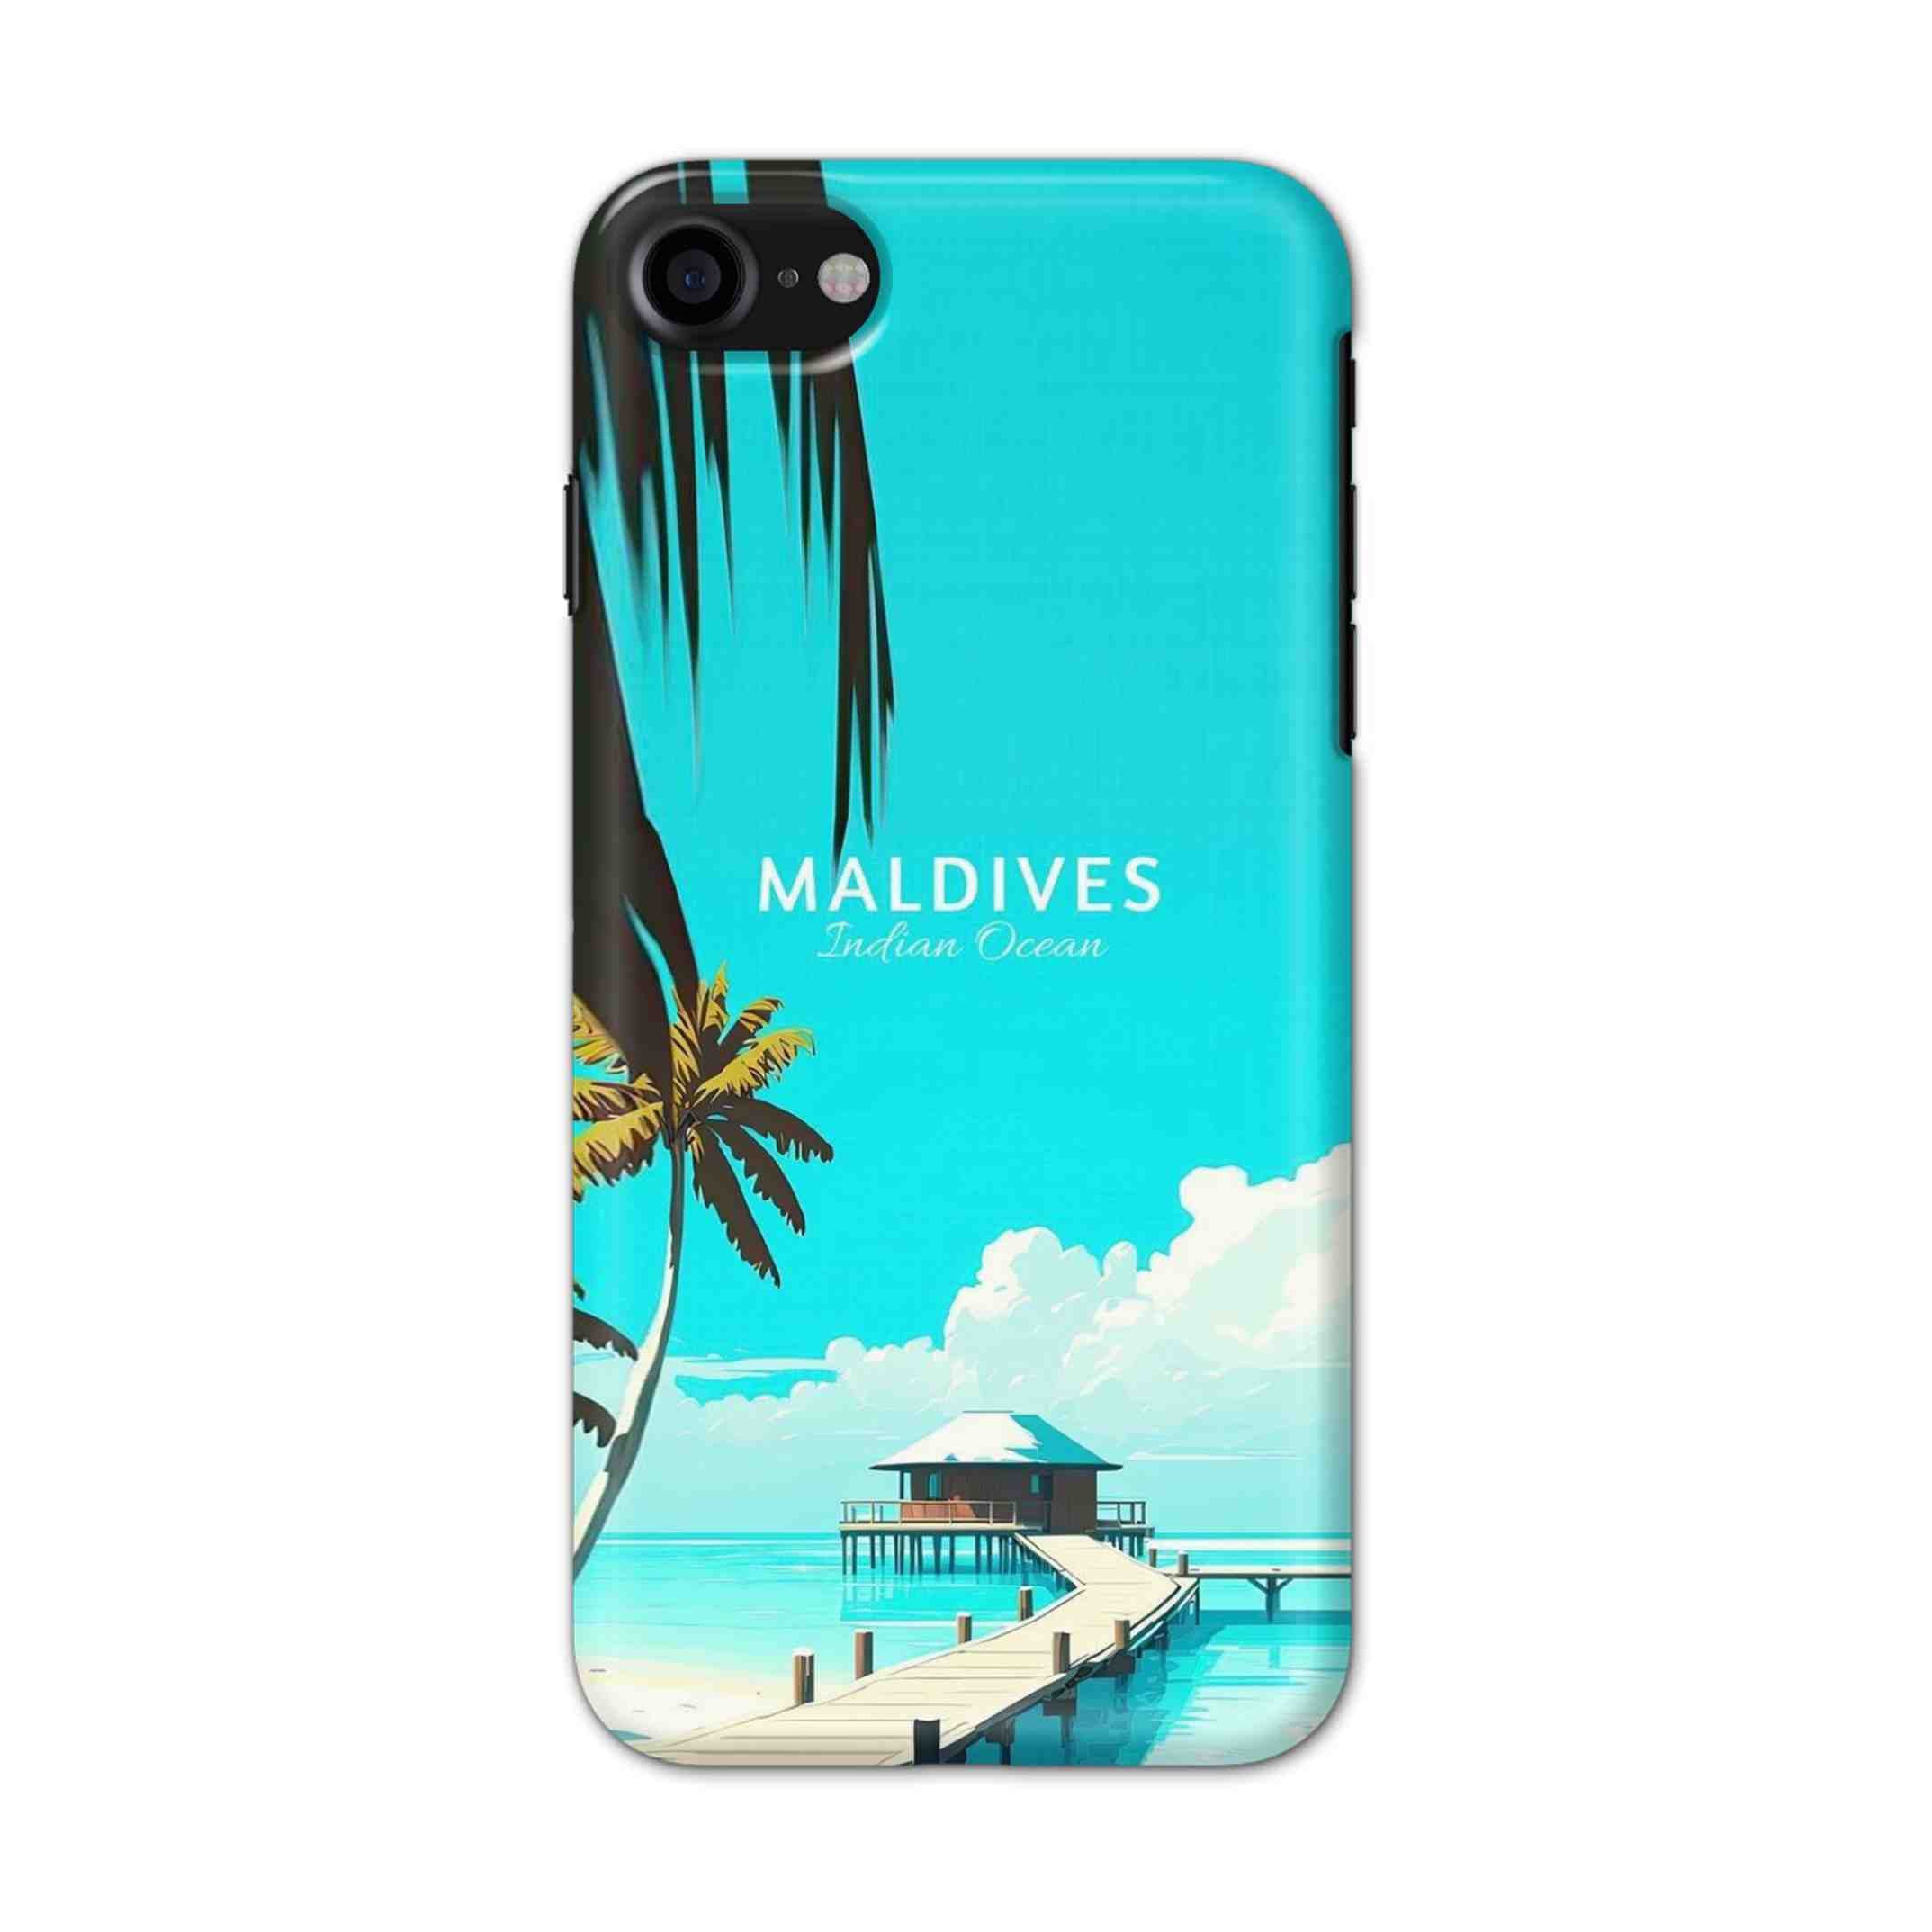 Buy Maldives Hard Back Mobile Phone Case/Cover For iPhone 7 / 8 Online